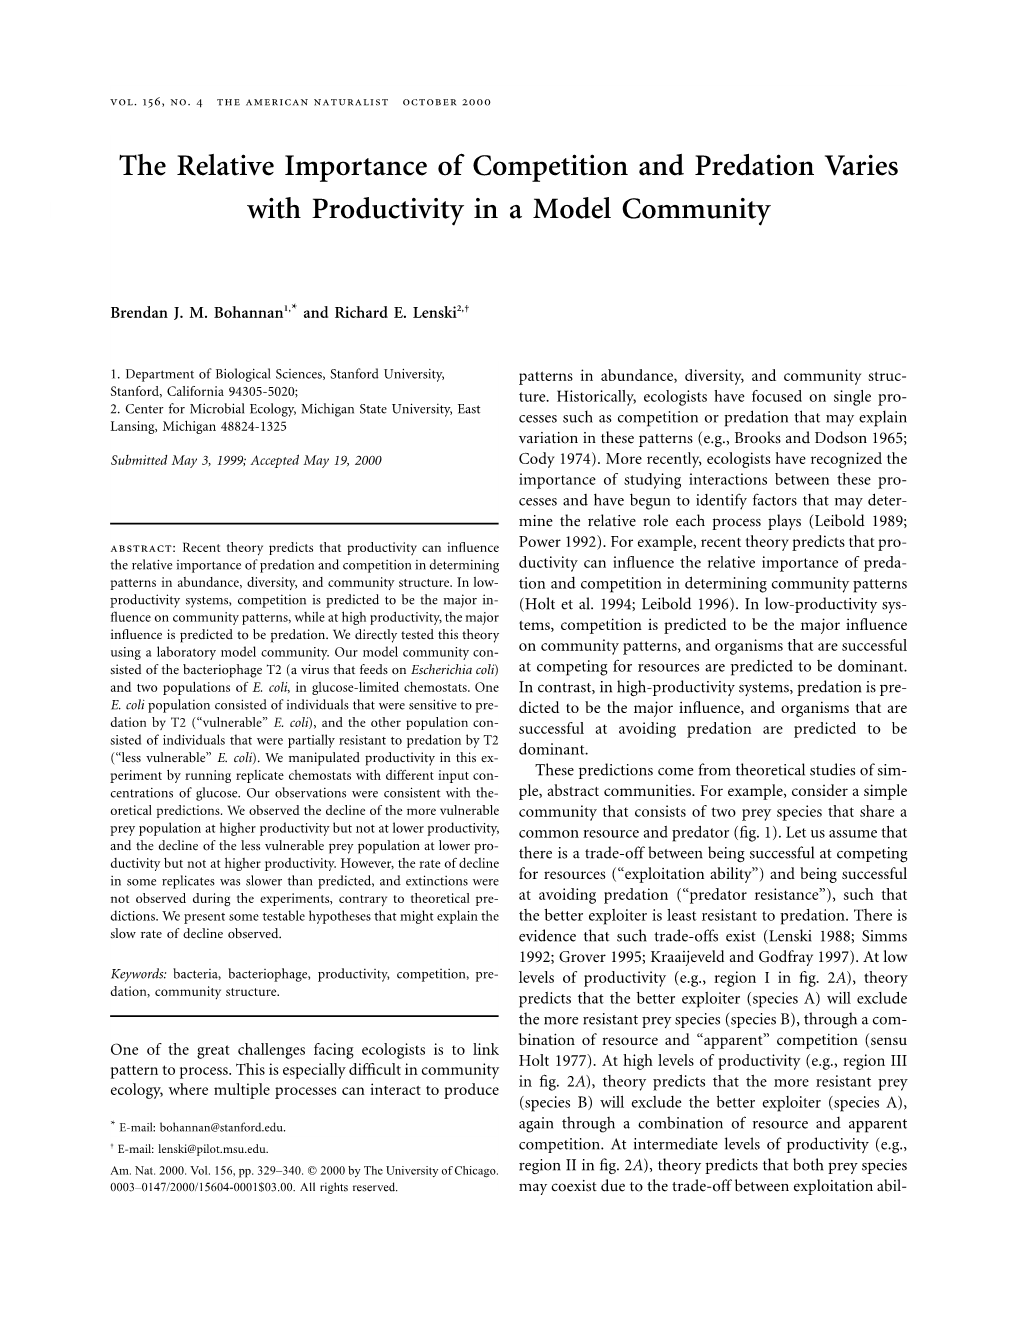 The Relative Importance of Competition and Predation Varies with Productivity in a Model Community